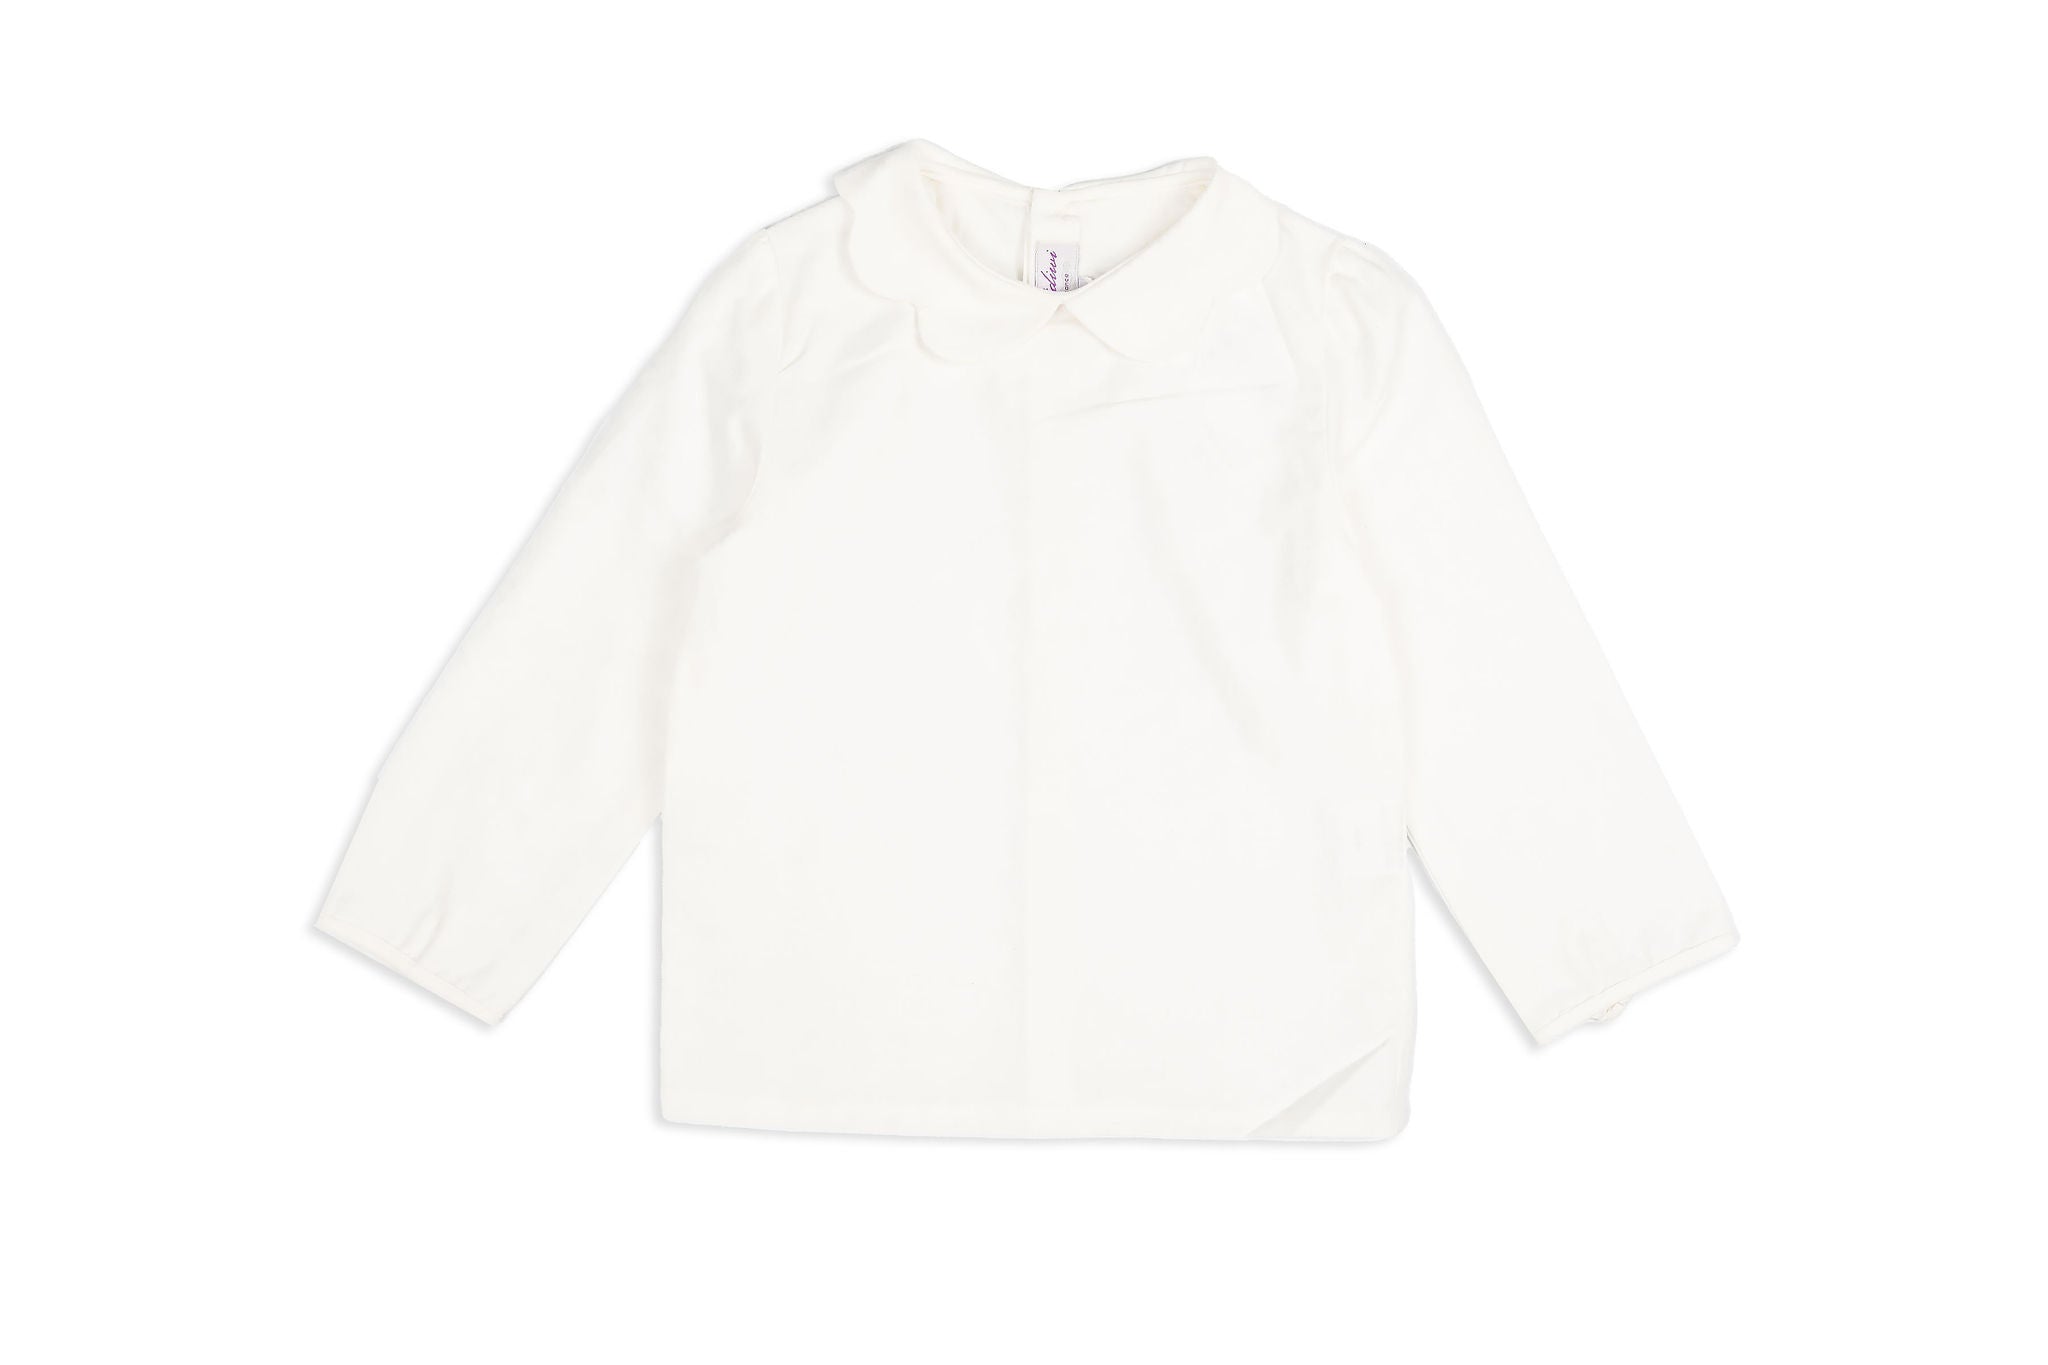 Anastasia Off-White Twill Long-Sleeve Blouse with Scalloped Collar